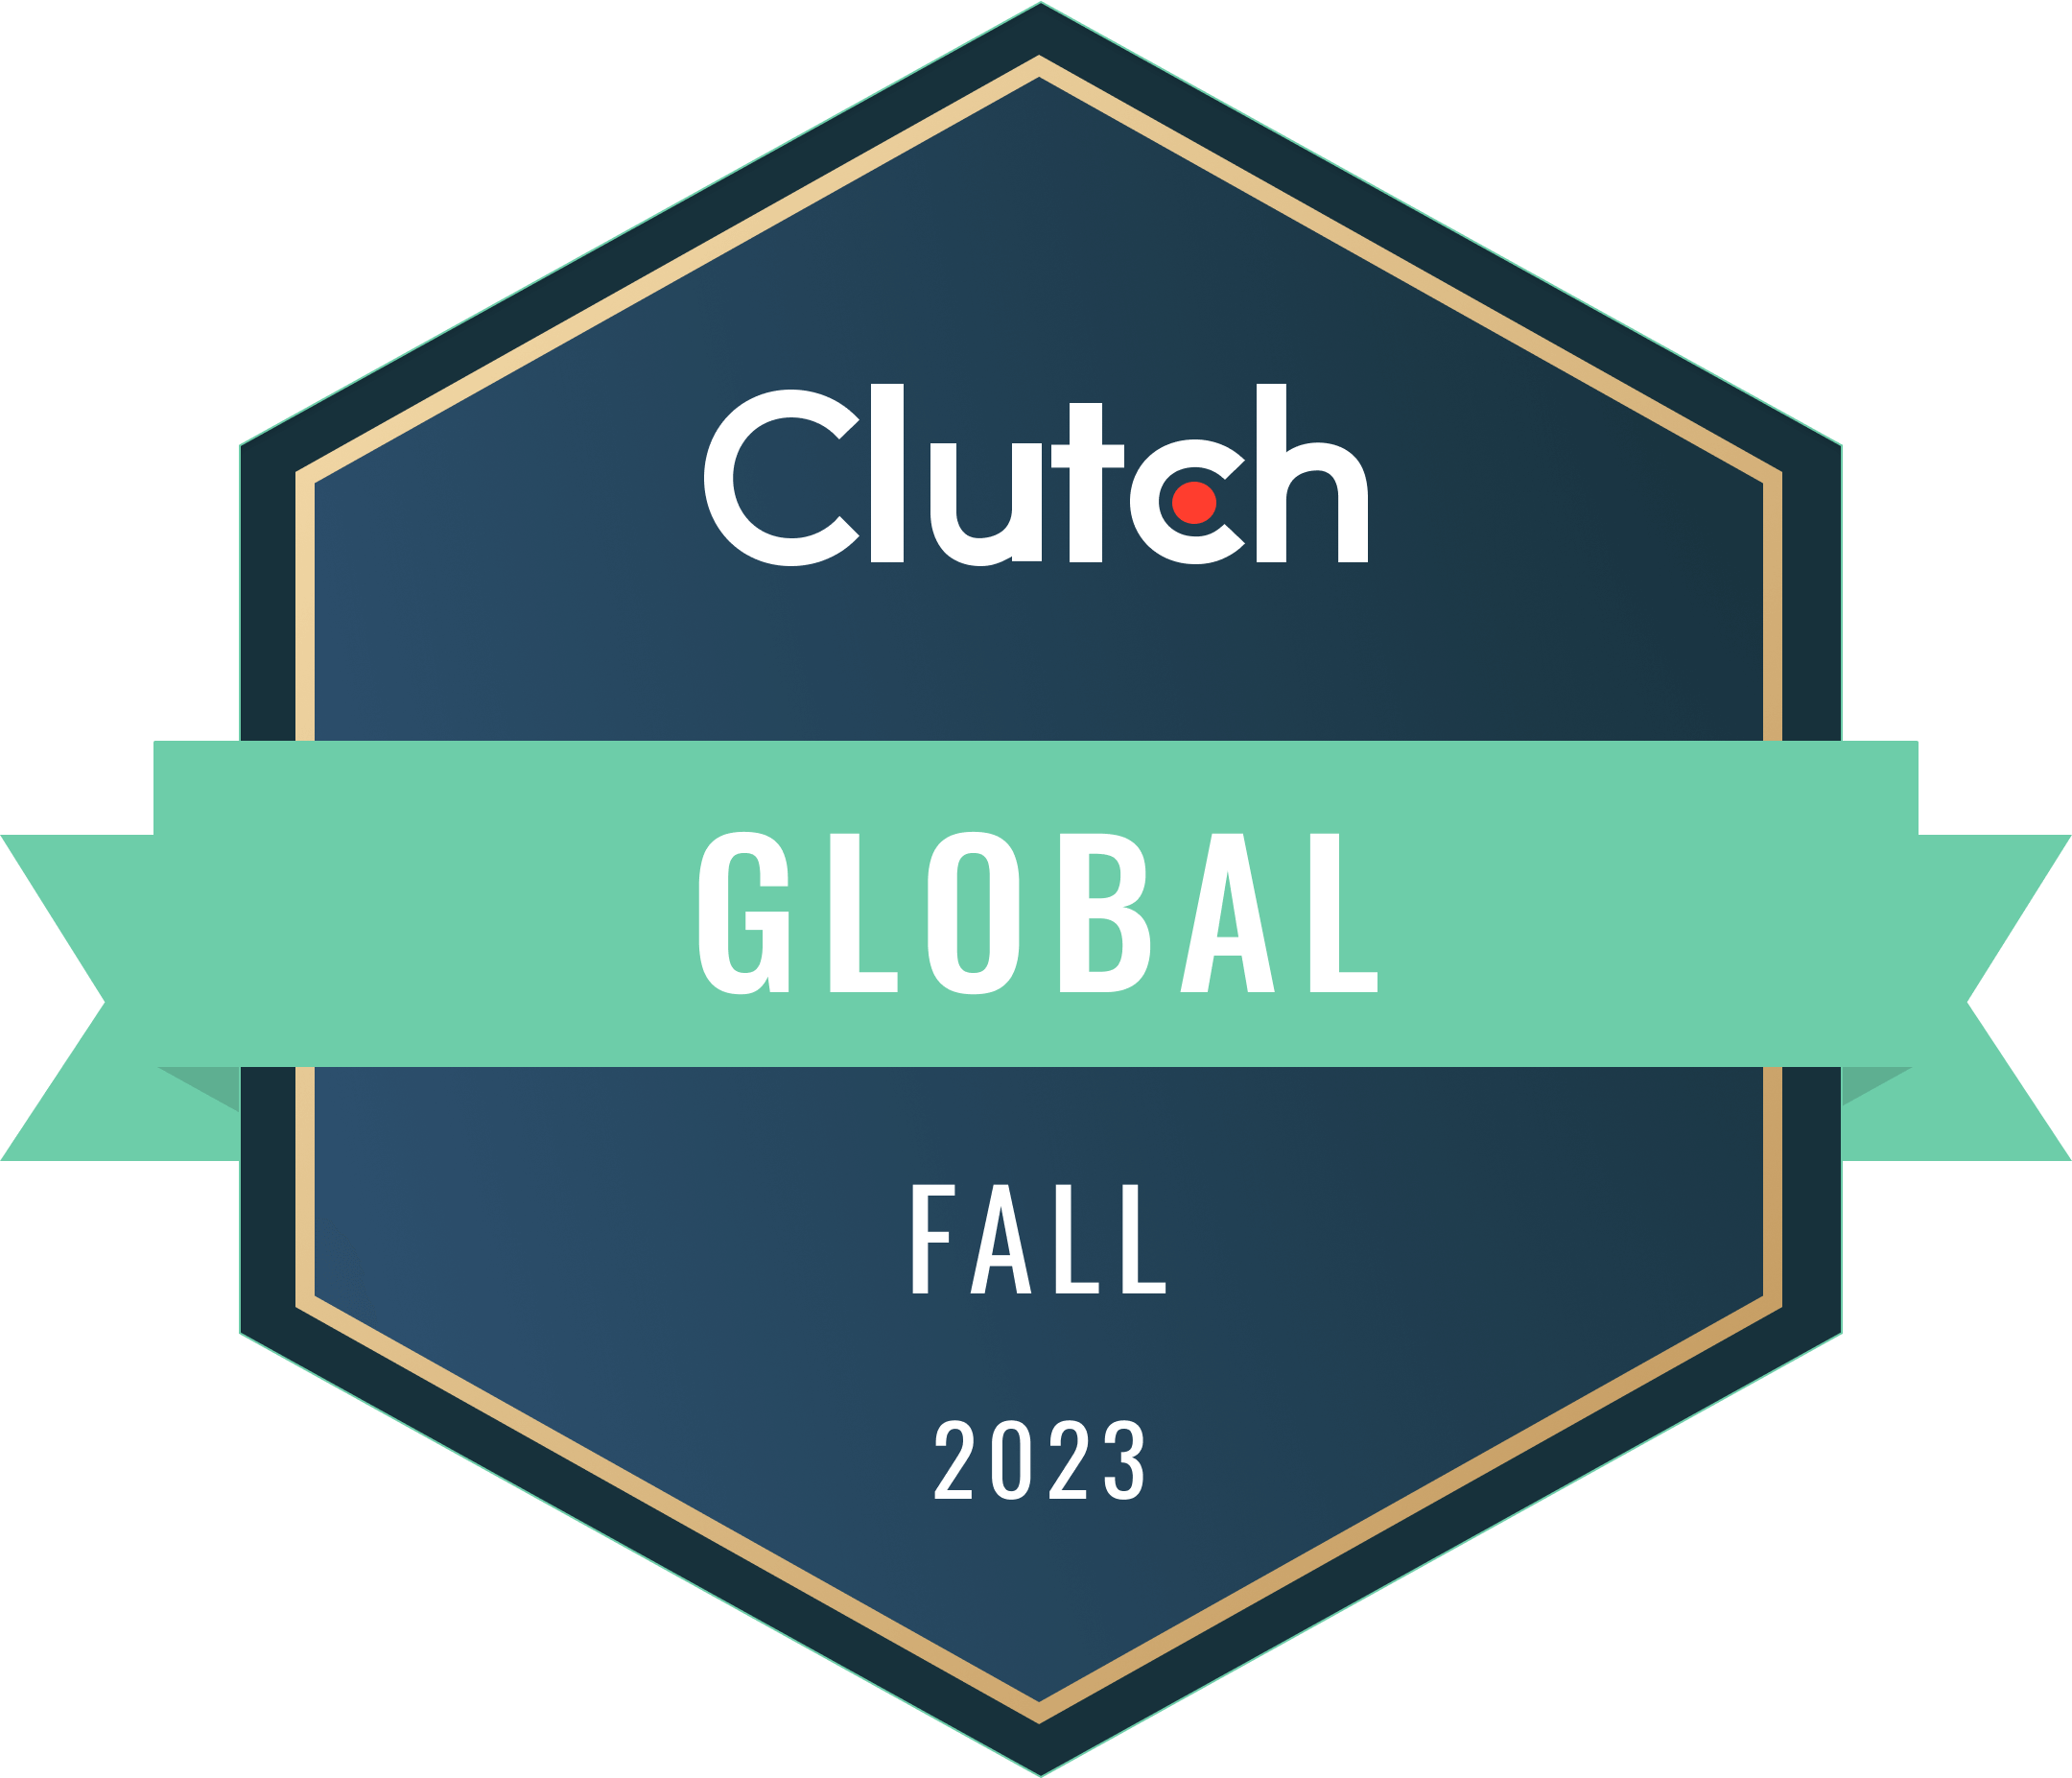 LTVplus recognized as Global leader by Clutch